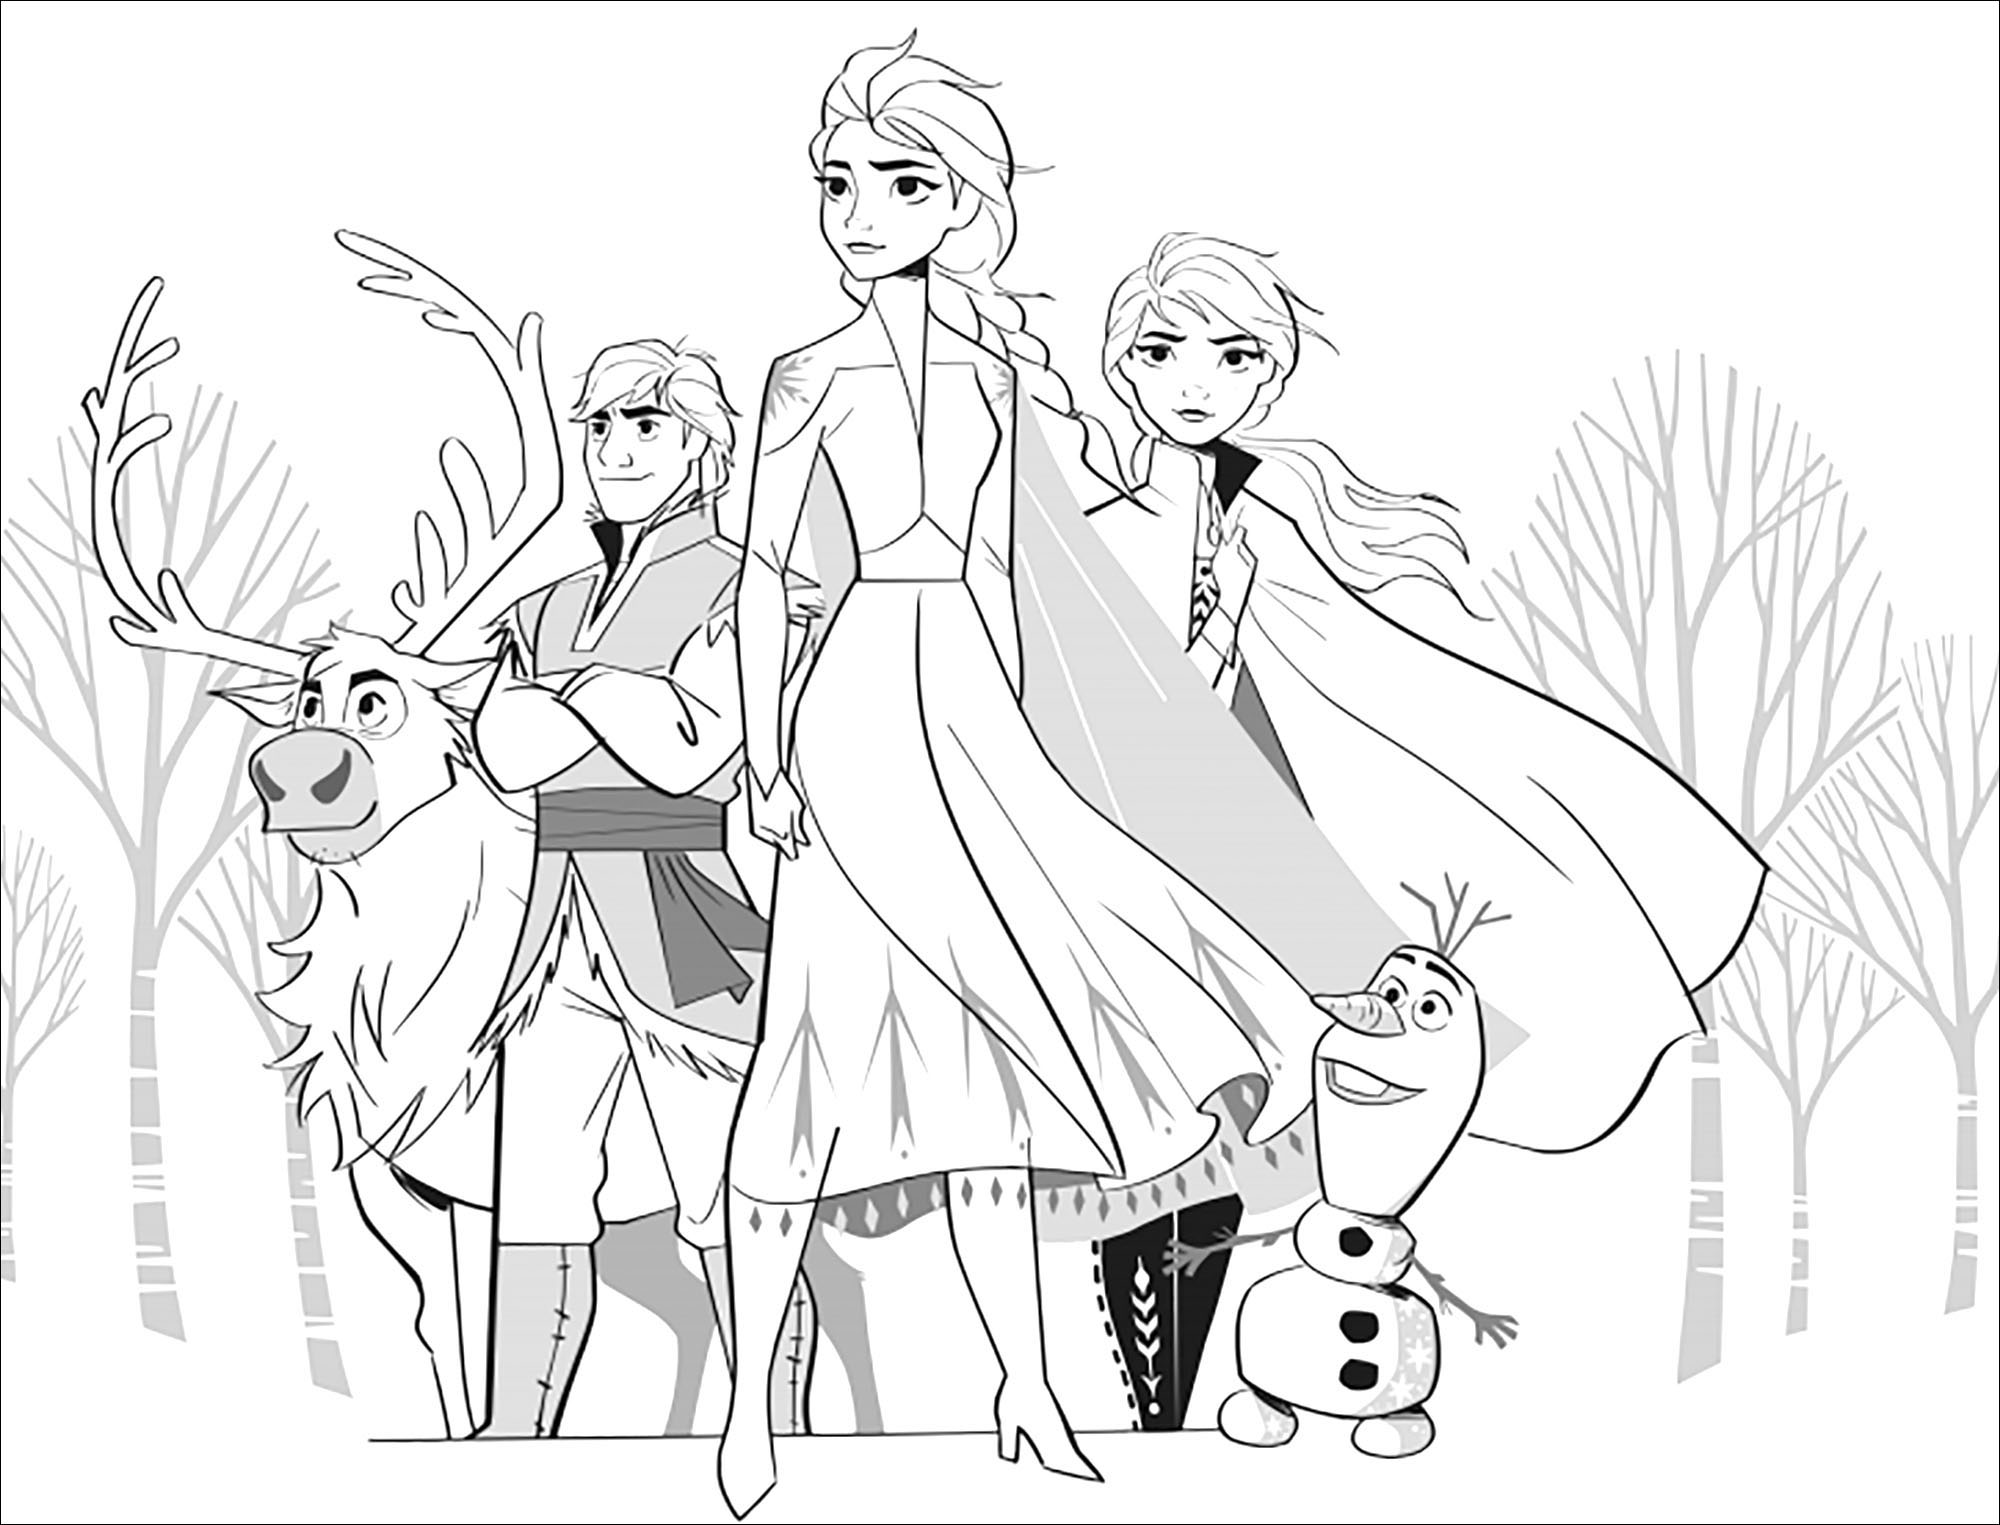 Frozen 2 Elsa Anna Olaf Sven Kristoff Without Text Frozen 2 Kids Coloring Pages